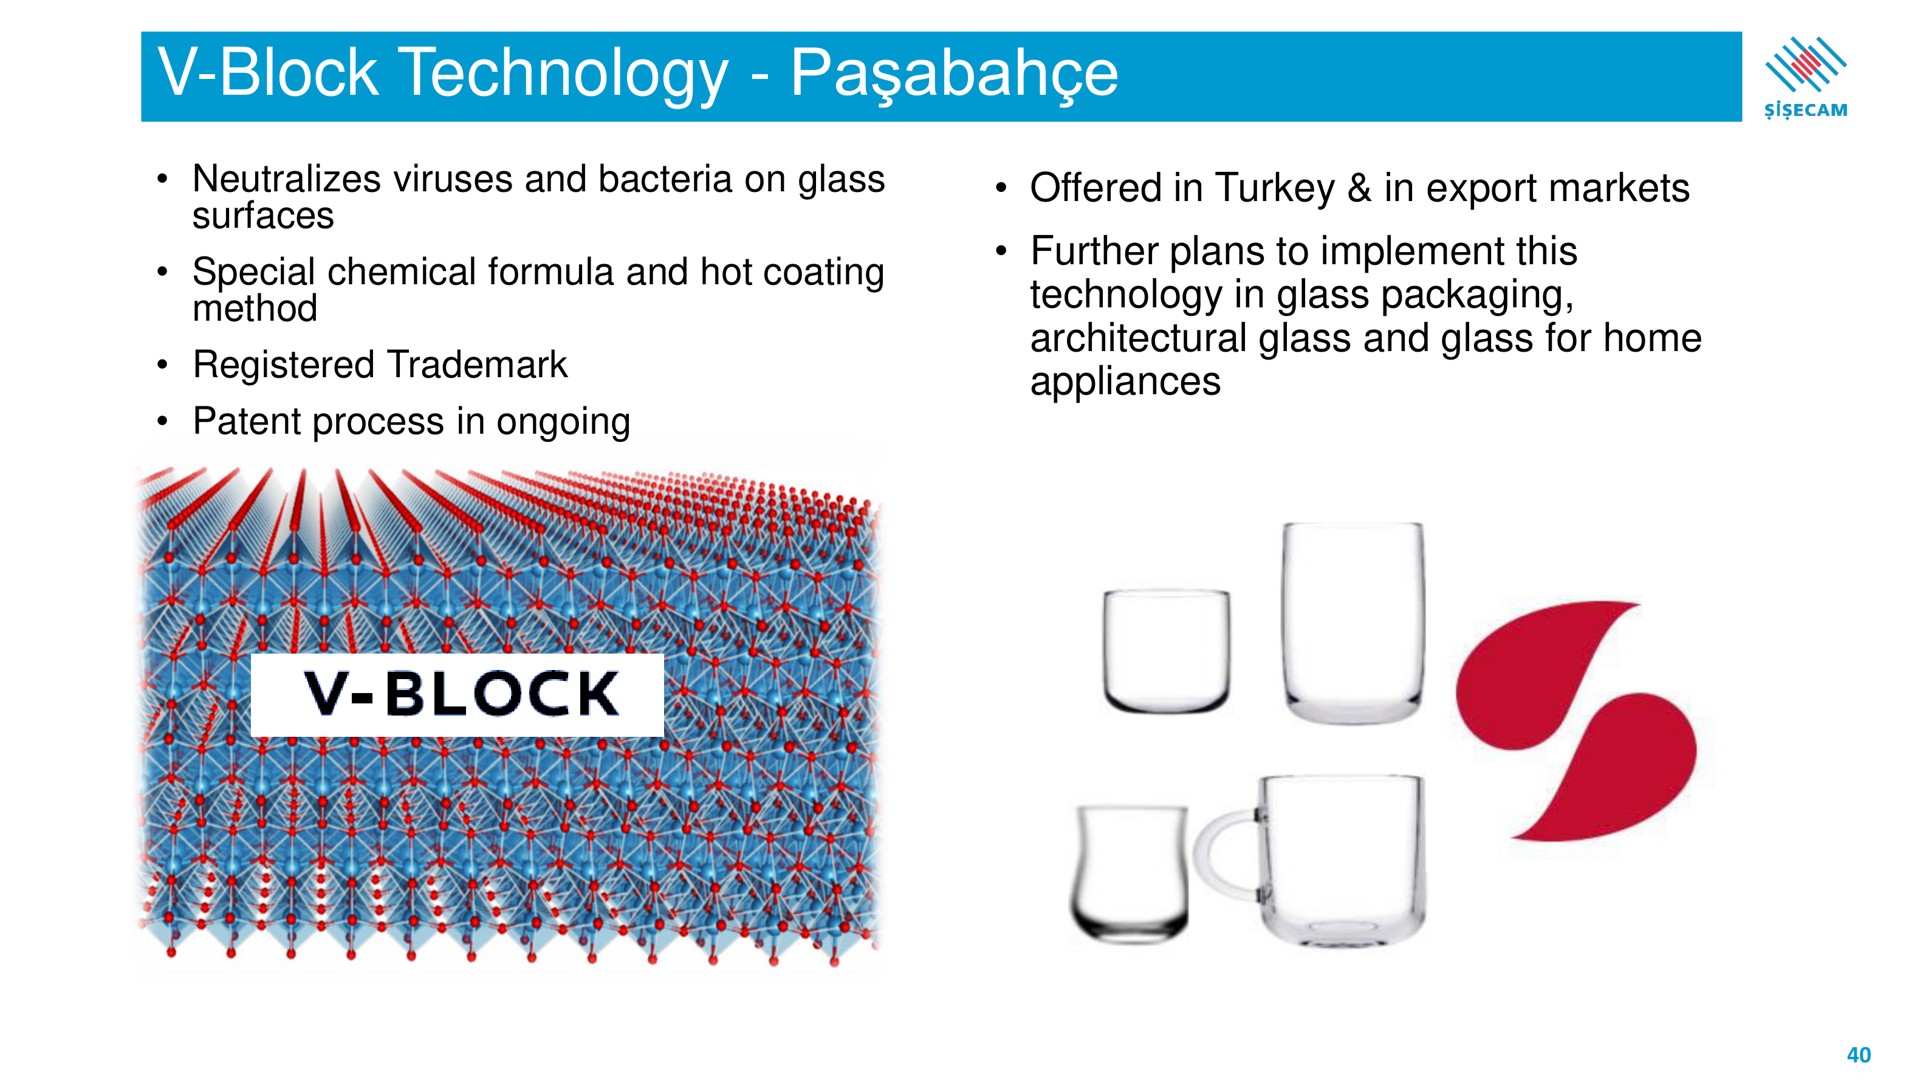 block technology neutralizes viruses and bacteria on glass surfaces special chemical formula and hot coating method registered patent process in ongoing offered in turkey in export markets further plans to implement this technology in glass packaging architectural glass and glass for home appliances dhoni | Sisecam Resources